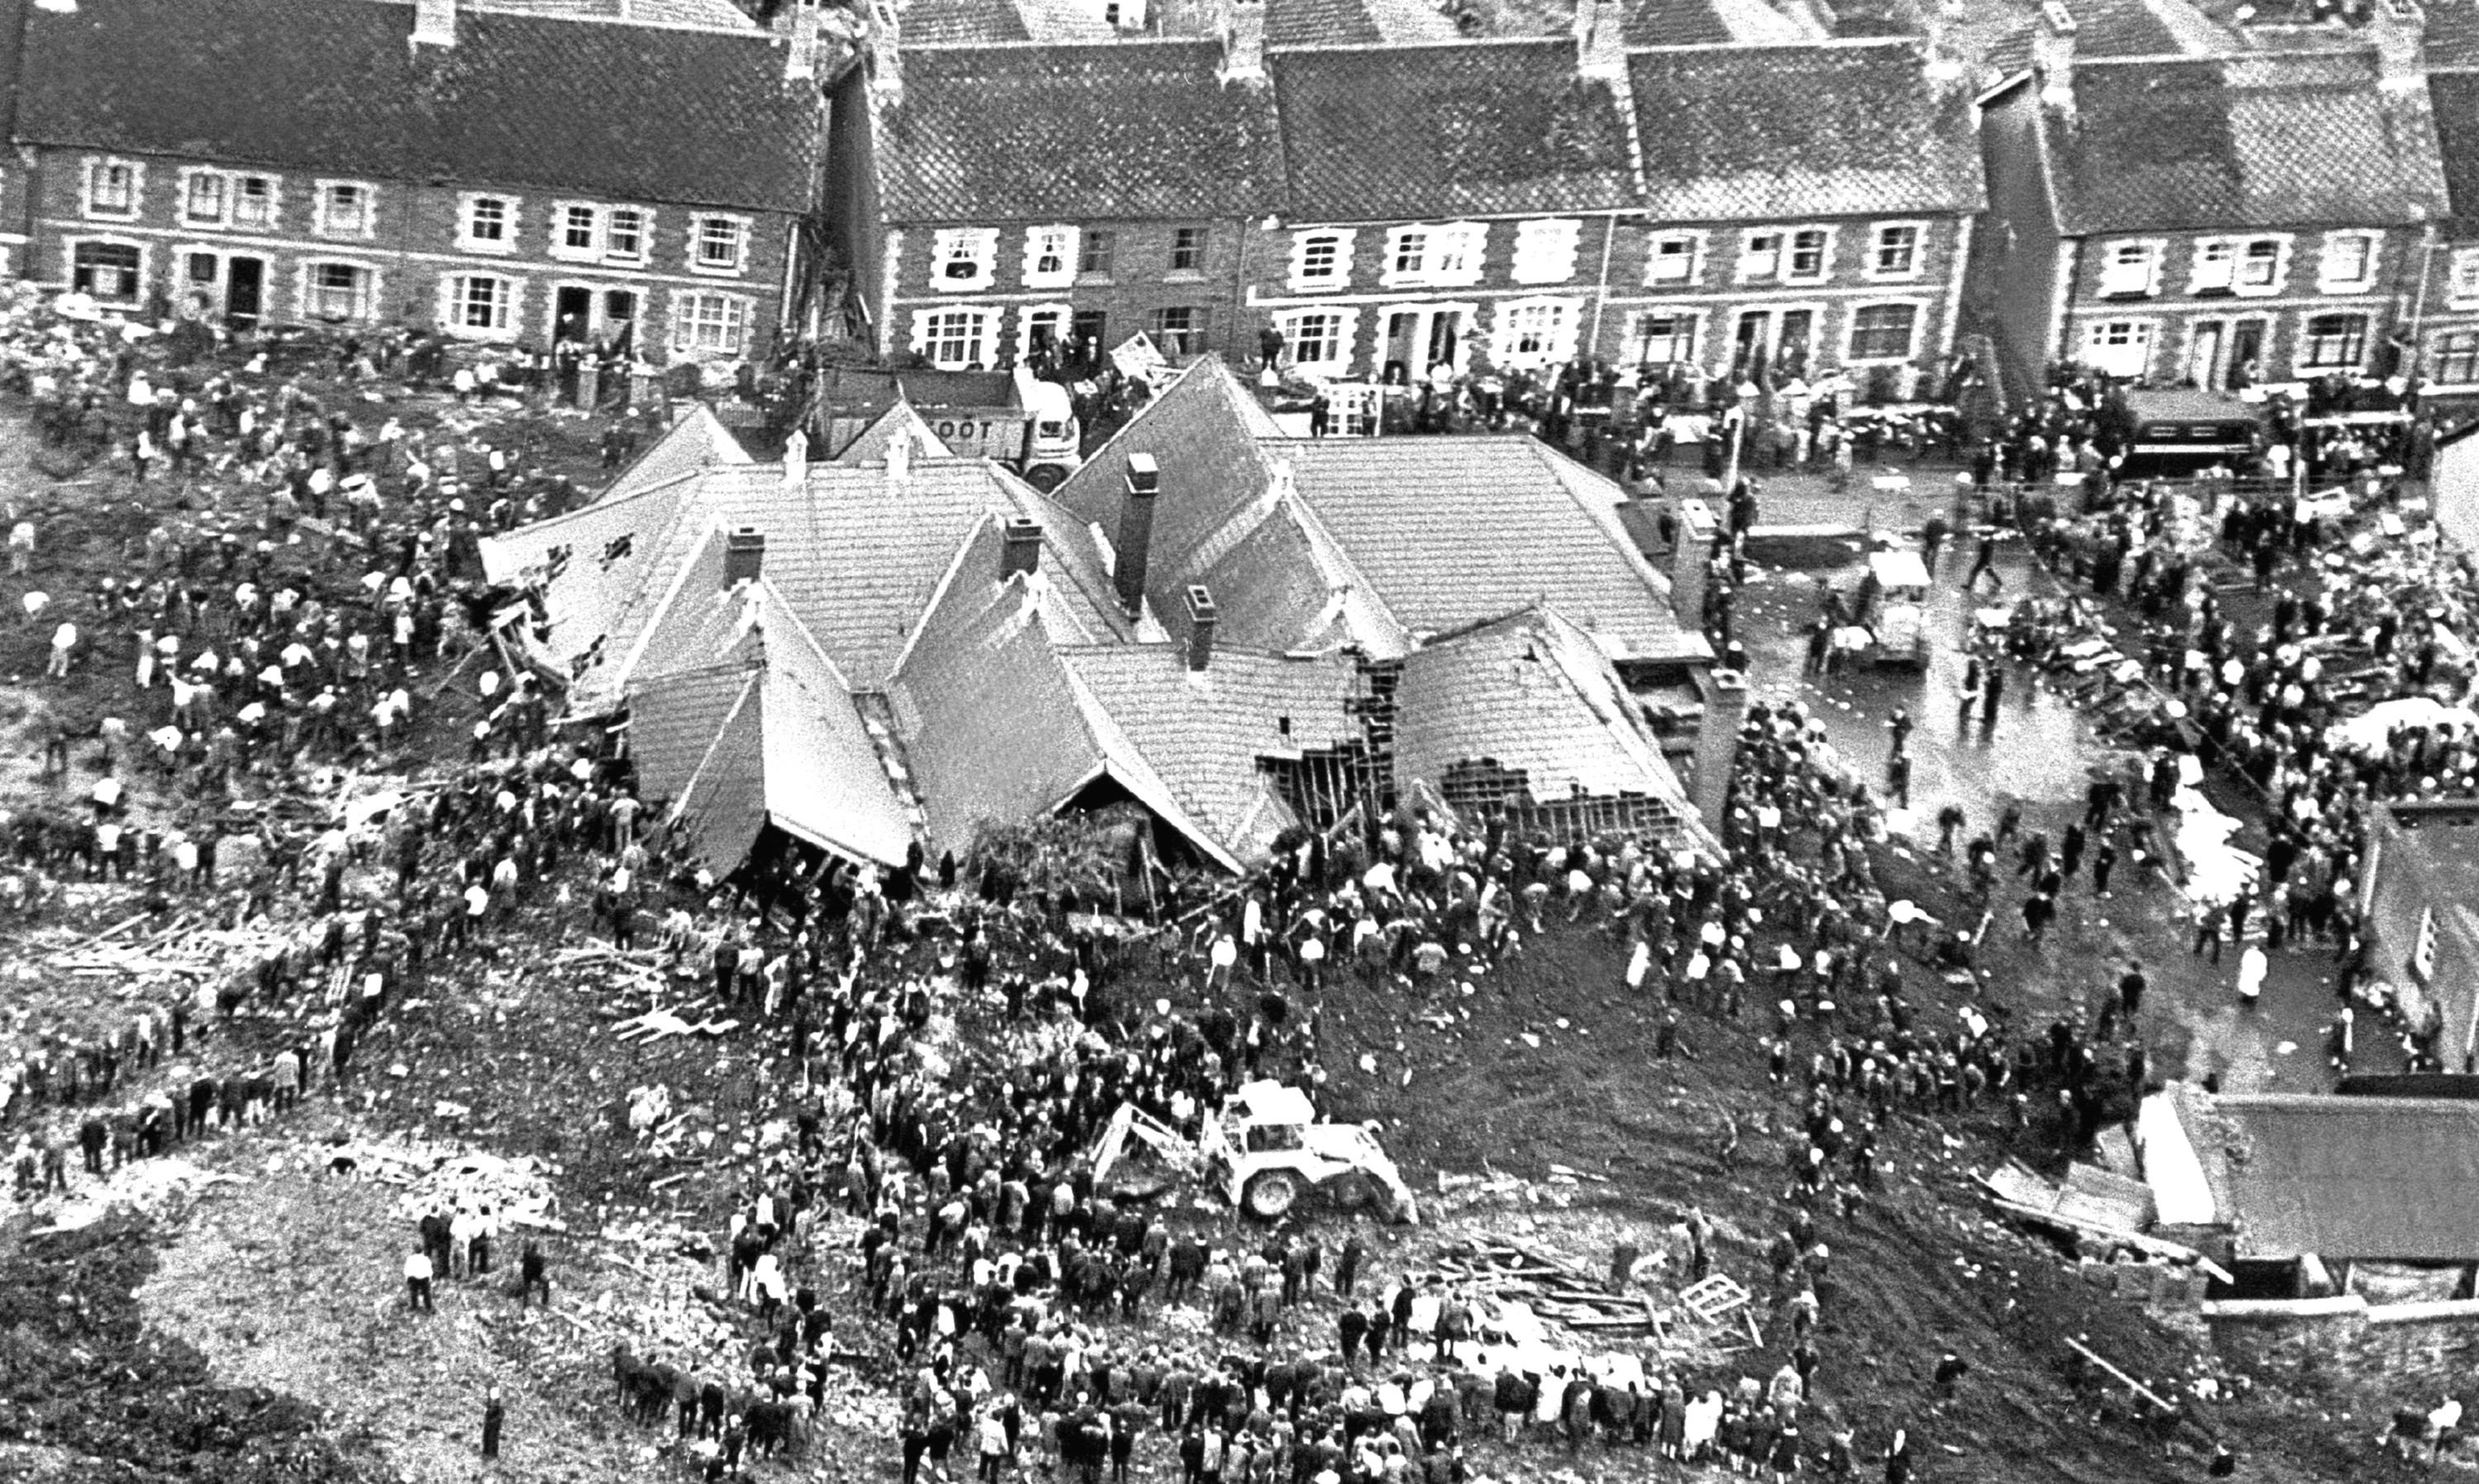 The terrible aftermath of the Aberfan disaster.